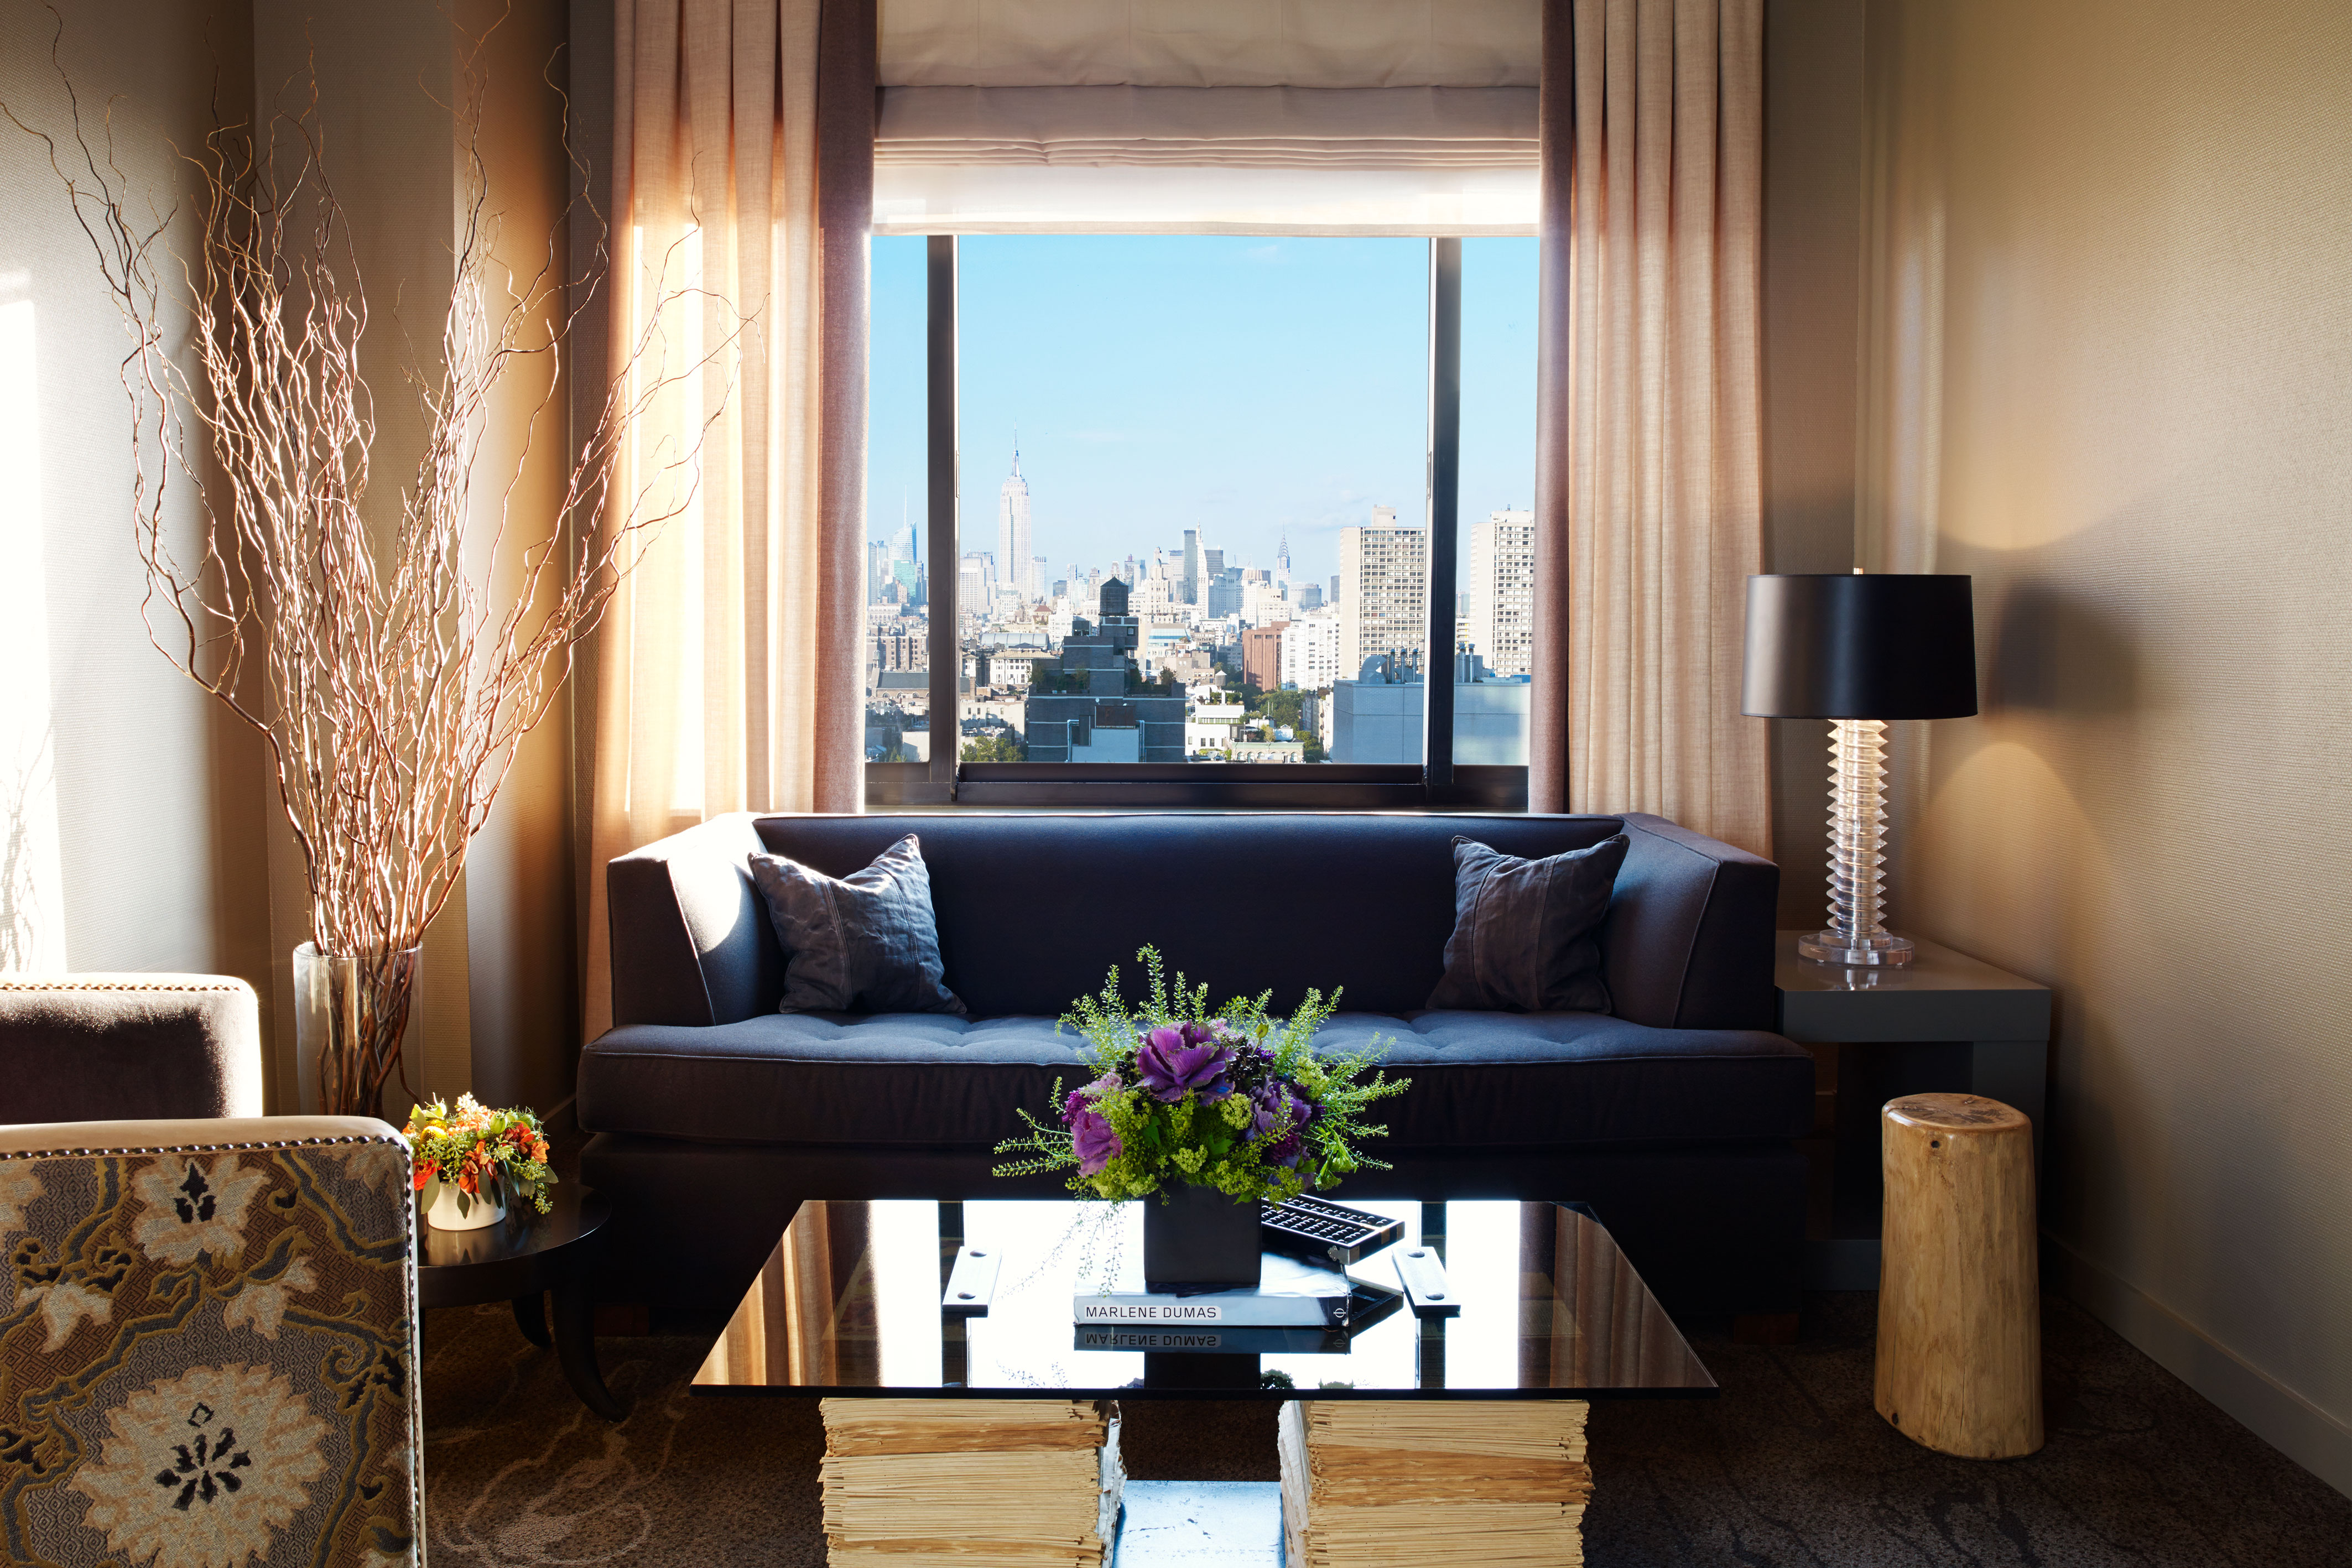 Deluxe One Bedroom Suite living rooo with a blue couch, coffee table with flowers and a plush chair. there is a view of the manhattan skyline